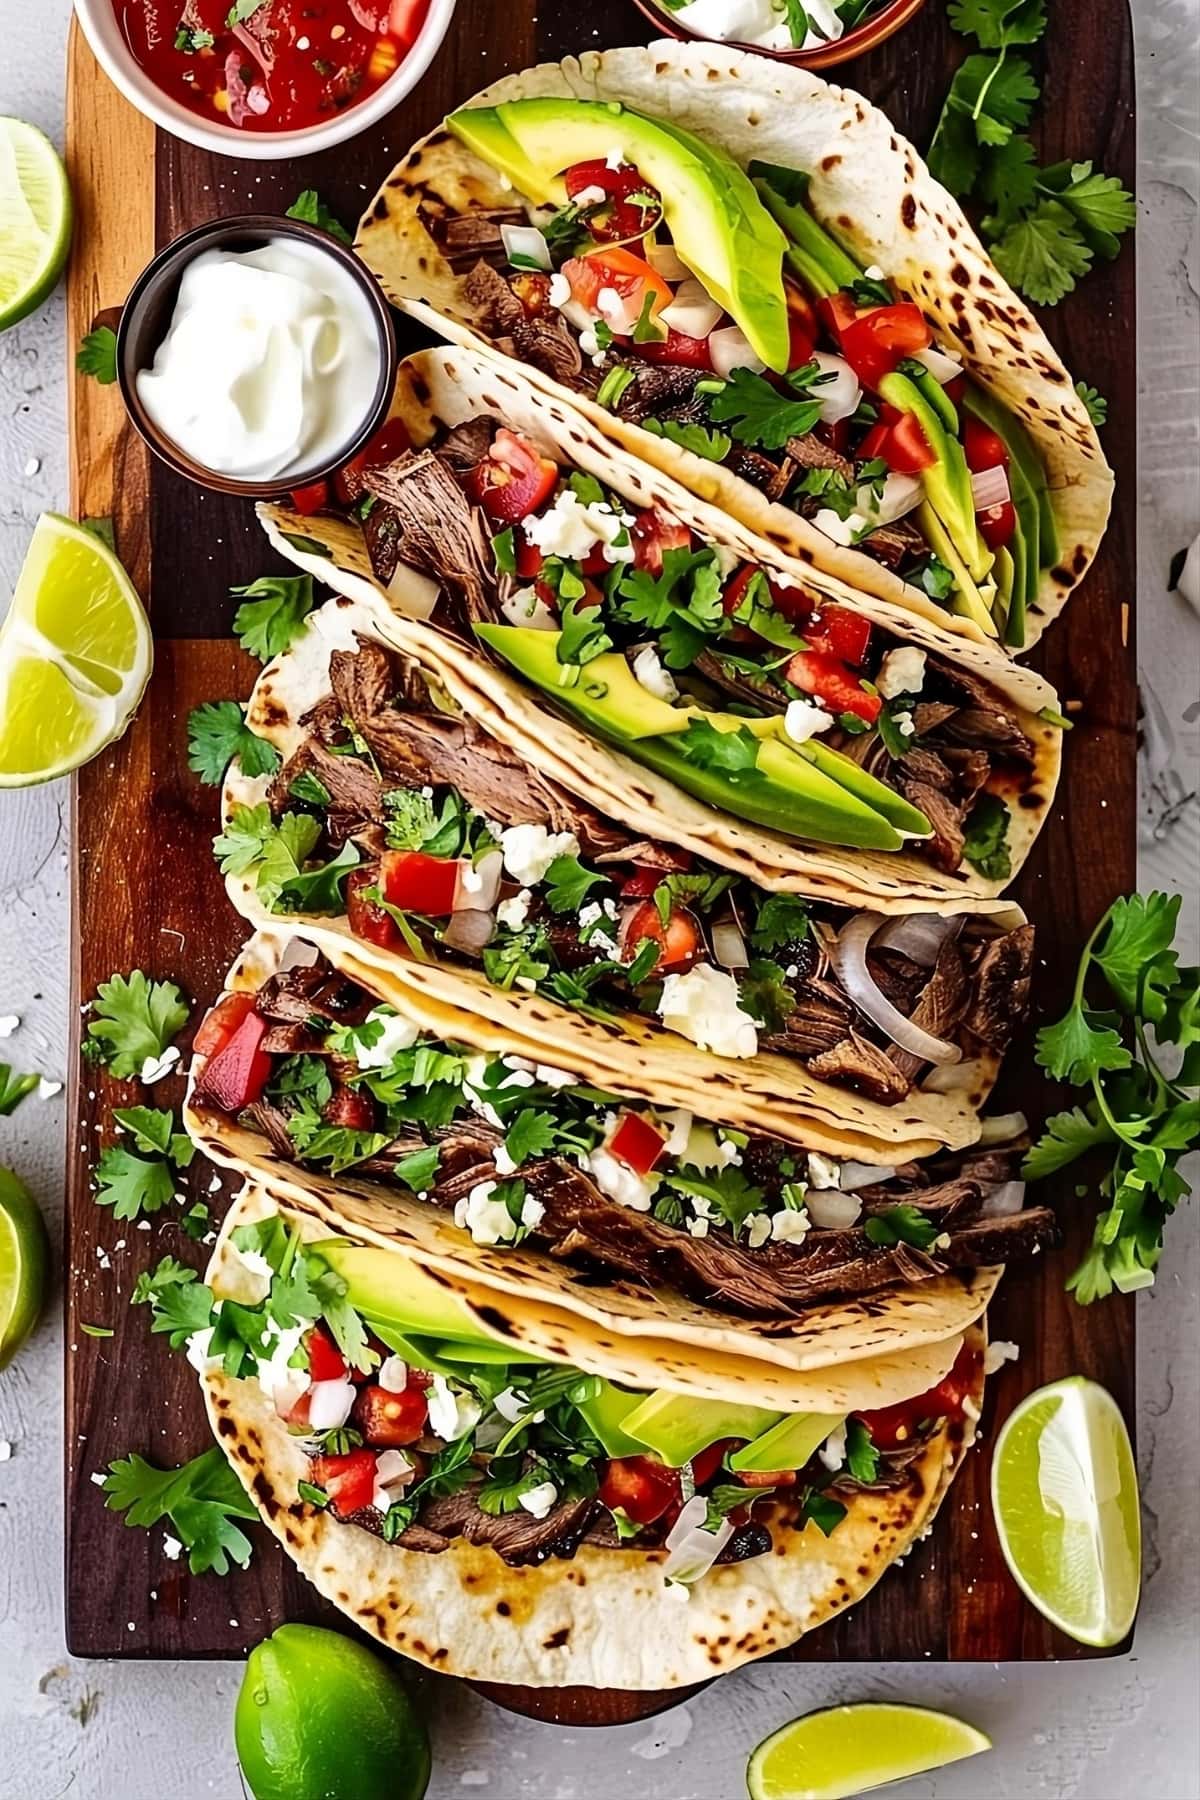 Tacos with shredded steak, onions and garlic, avocado, cilantro, sour cream, salsa, and queso fresco served on a wooden tray.